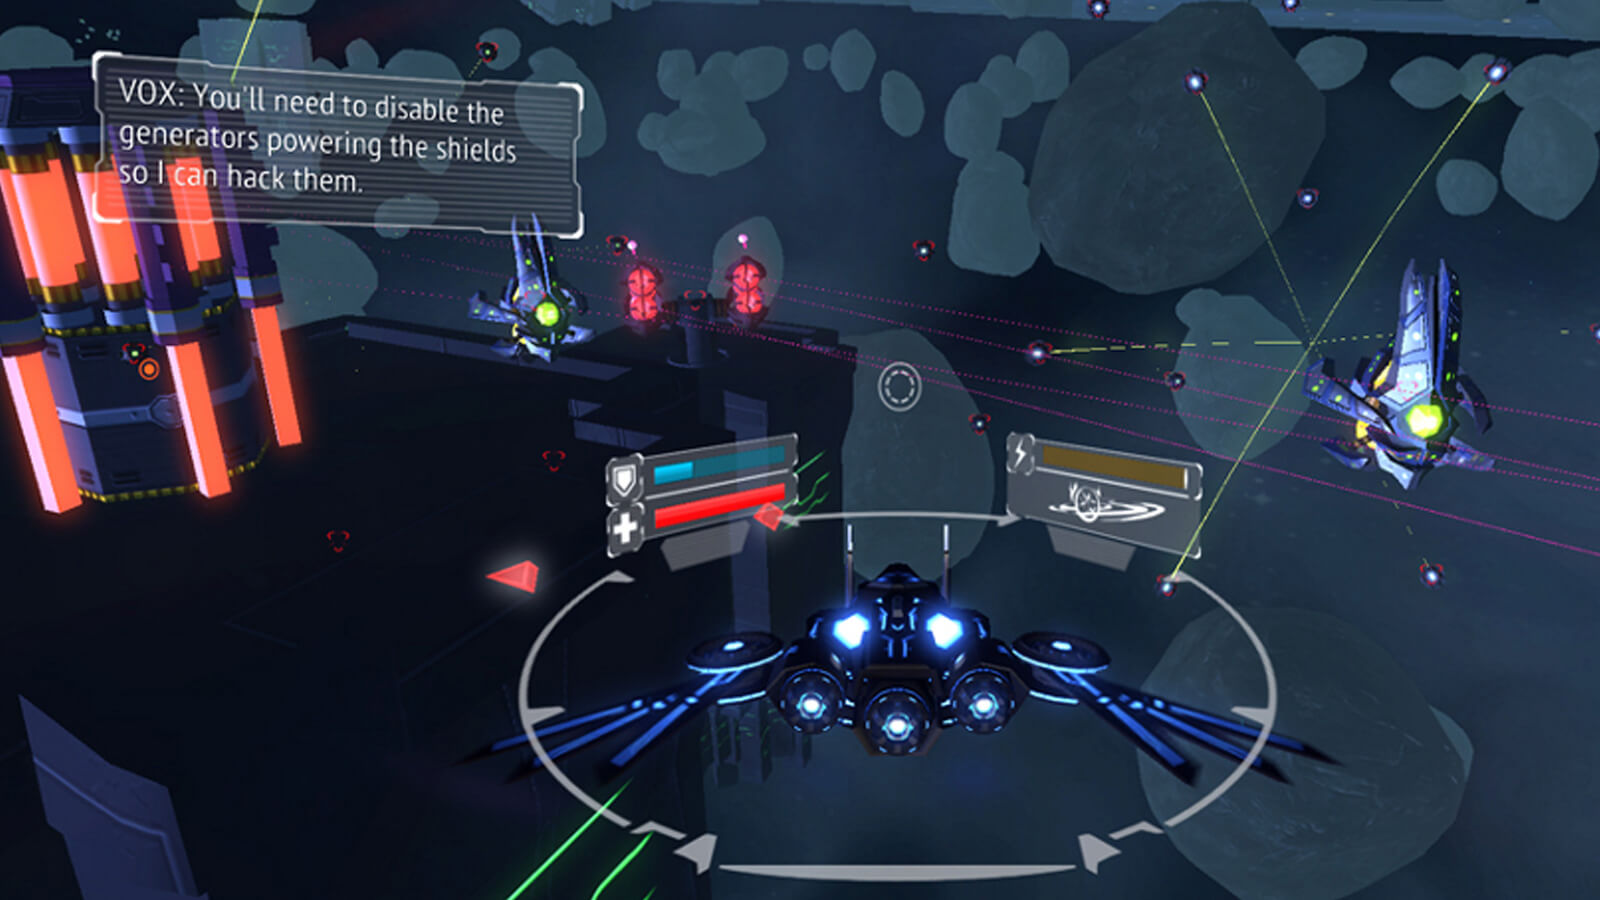 View of the player's blue and black space ship from behind with two blue enemy ships approaching